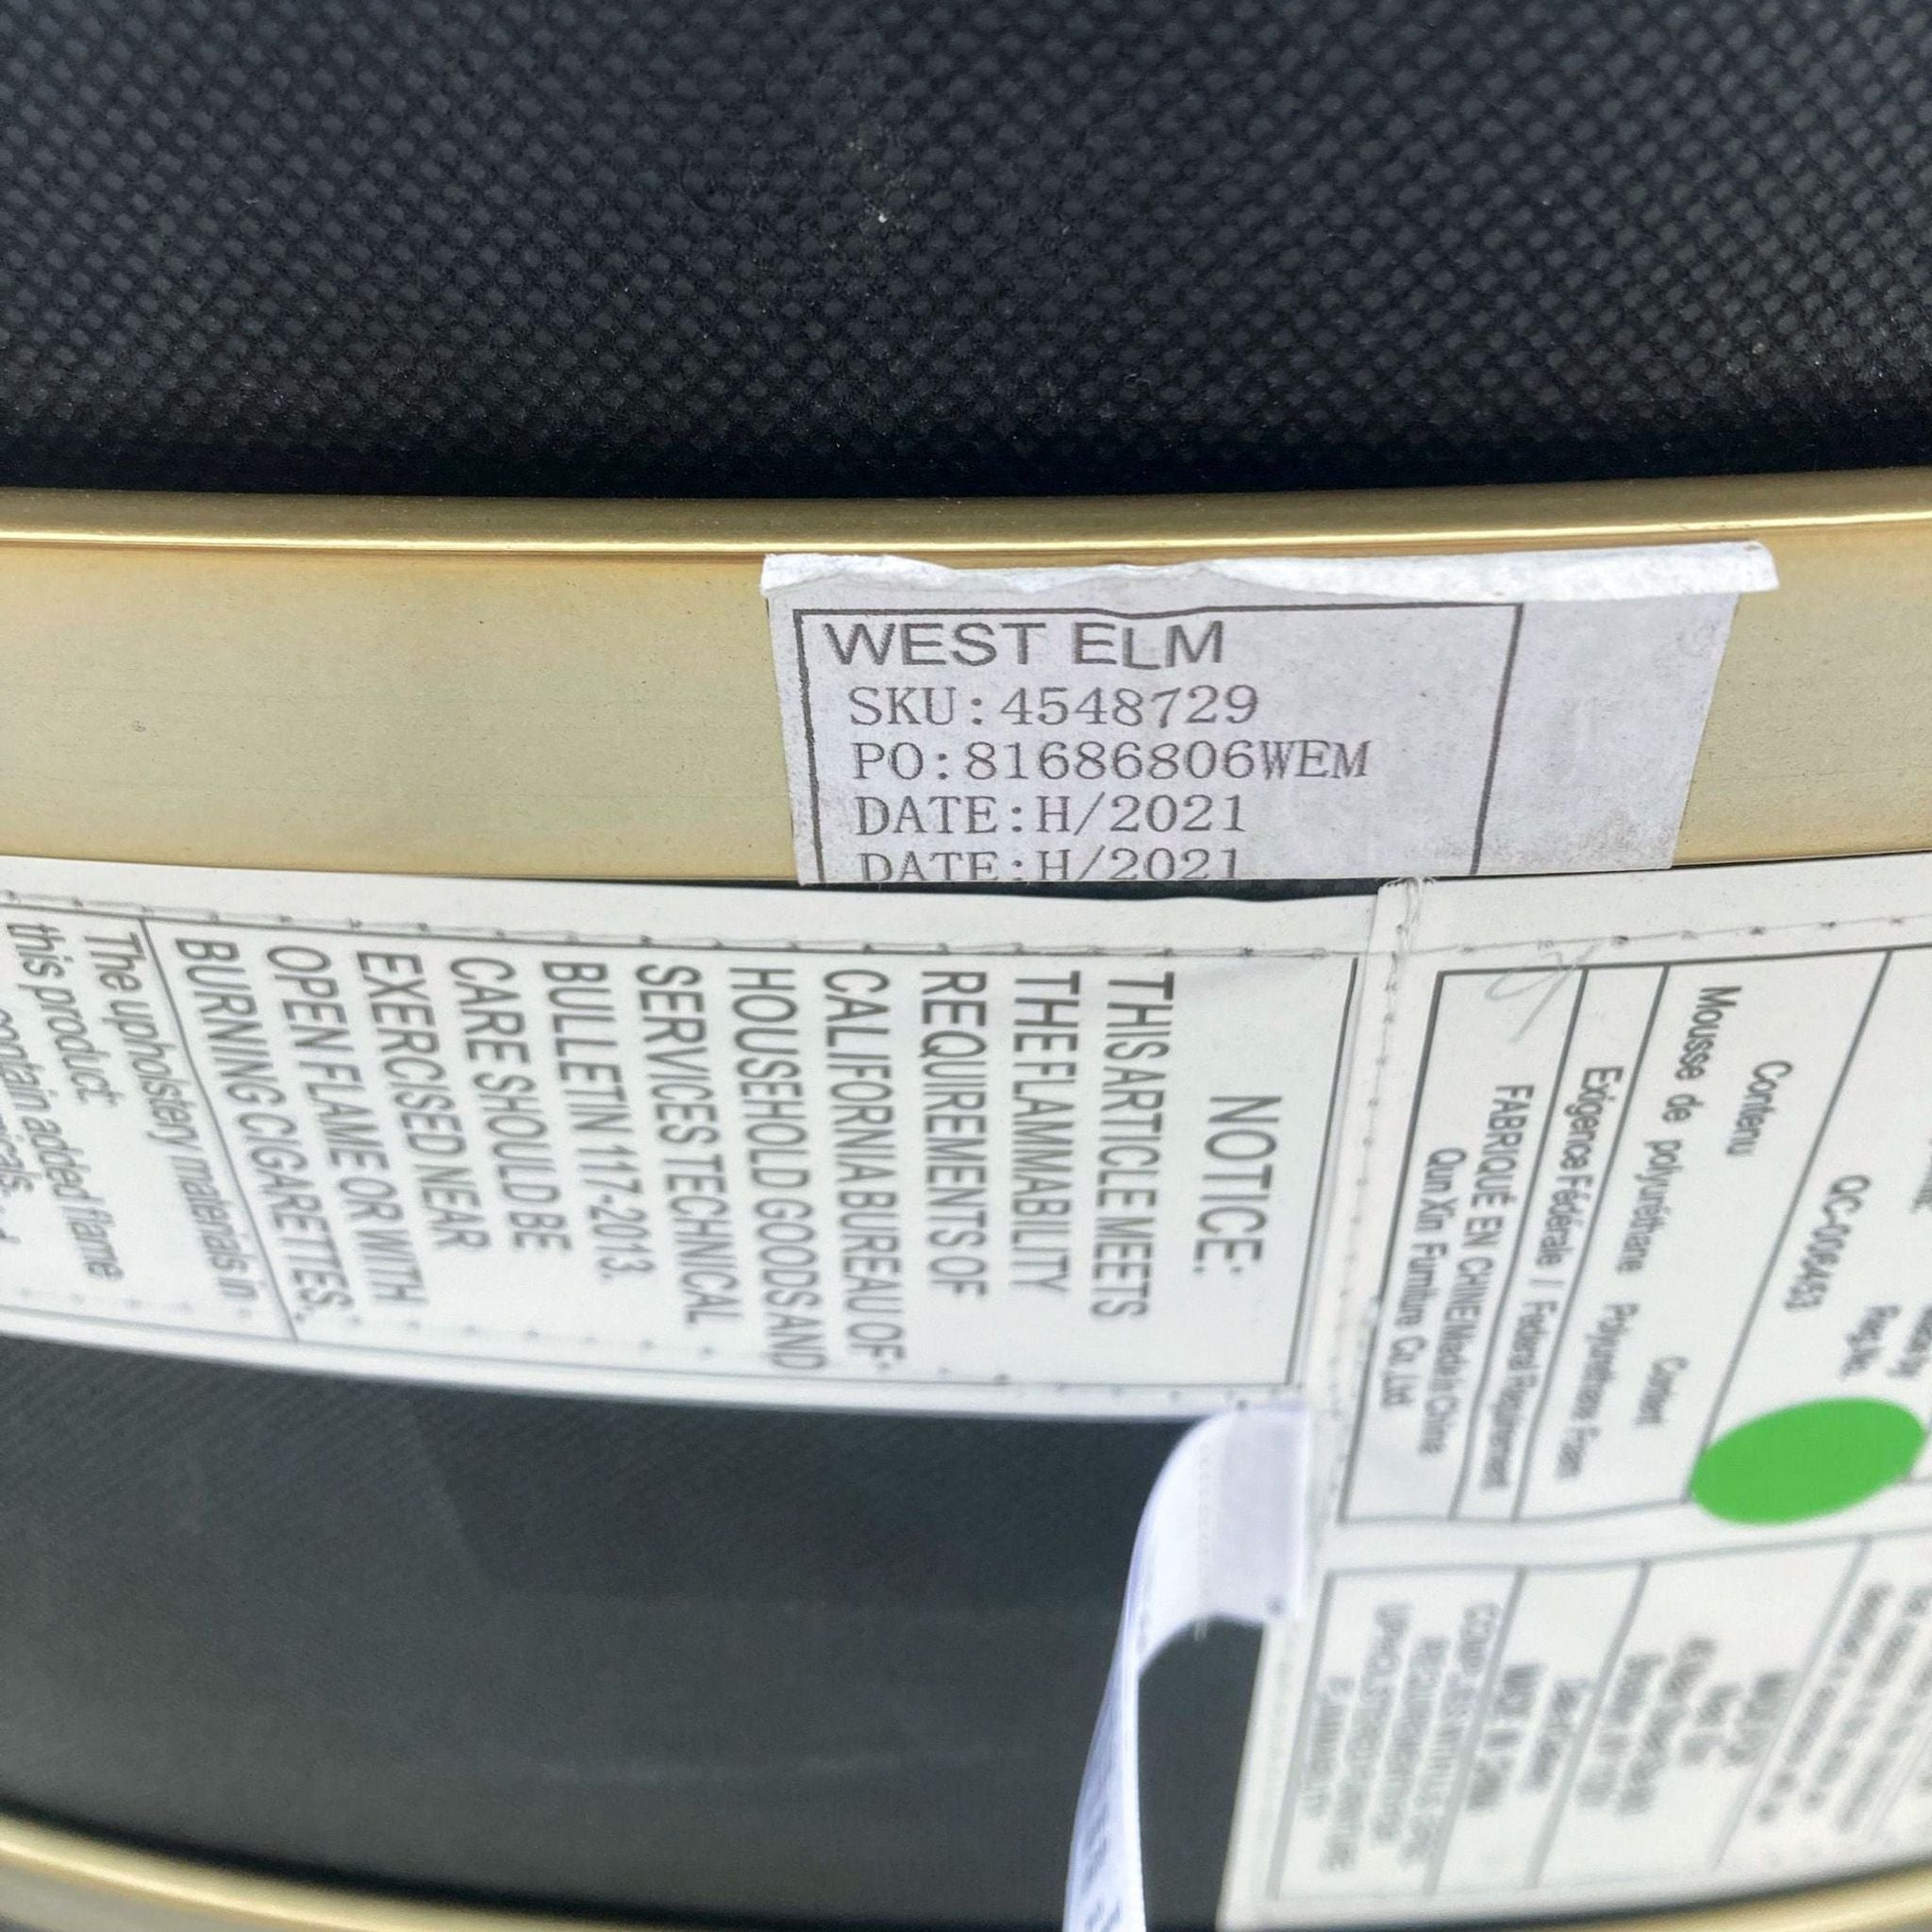 Detail of West Elm SKU and product information on a label attached to a stool.